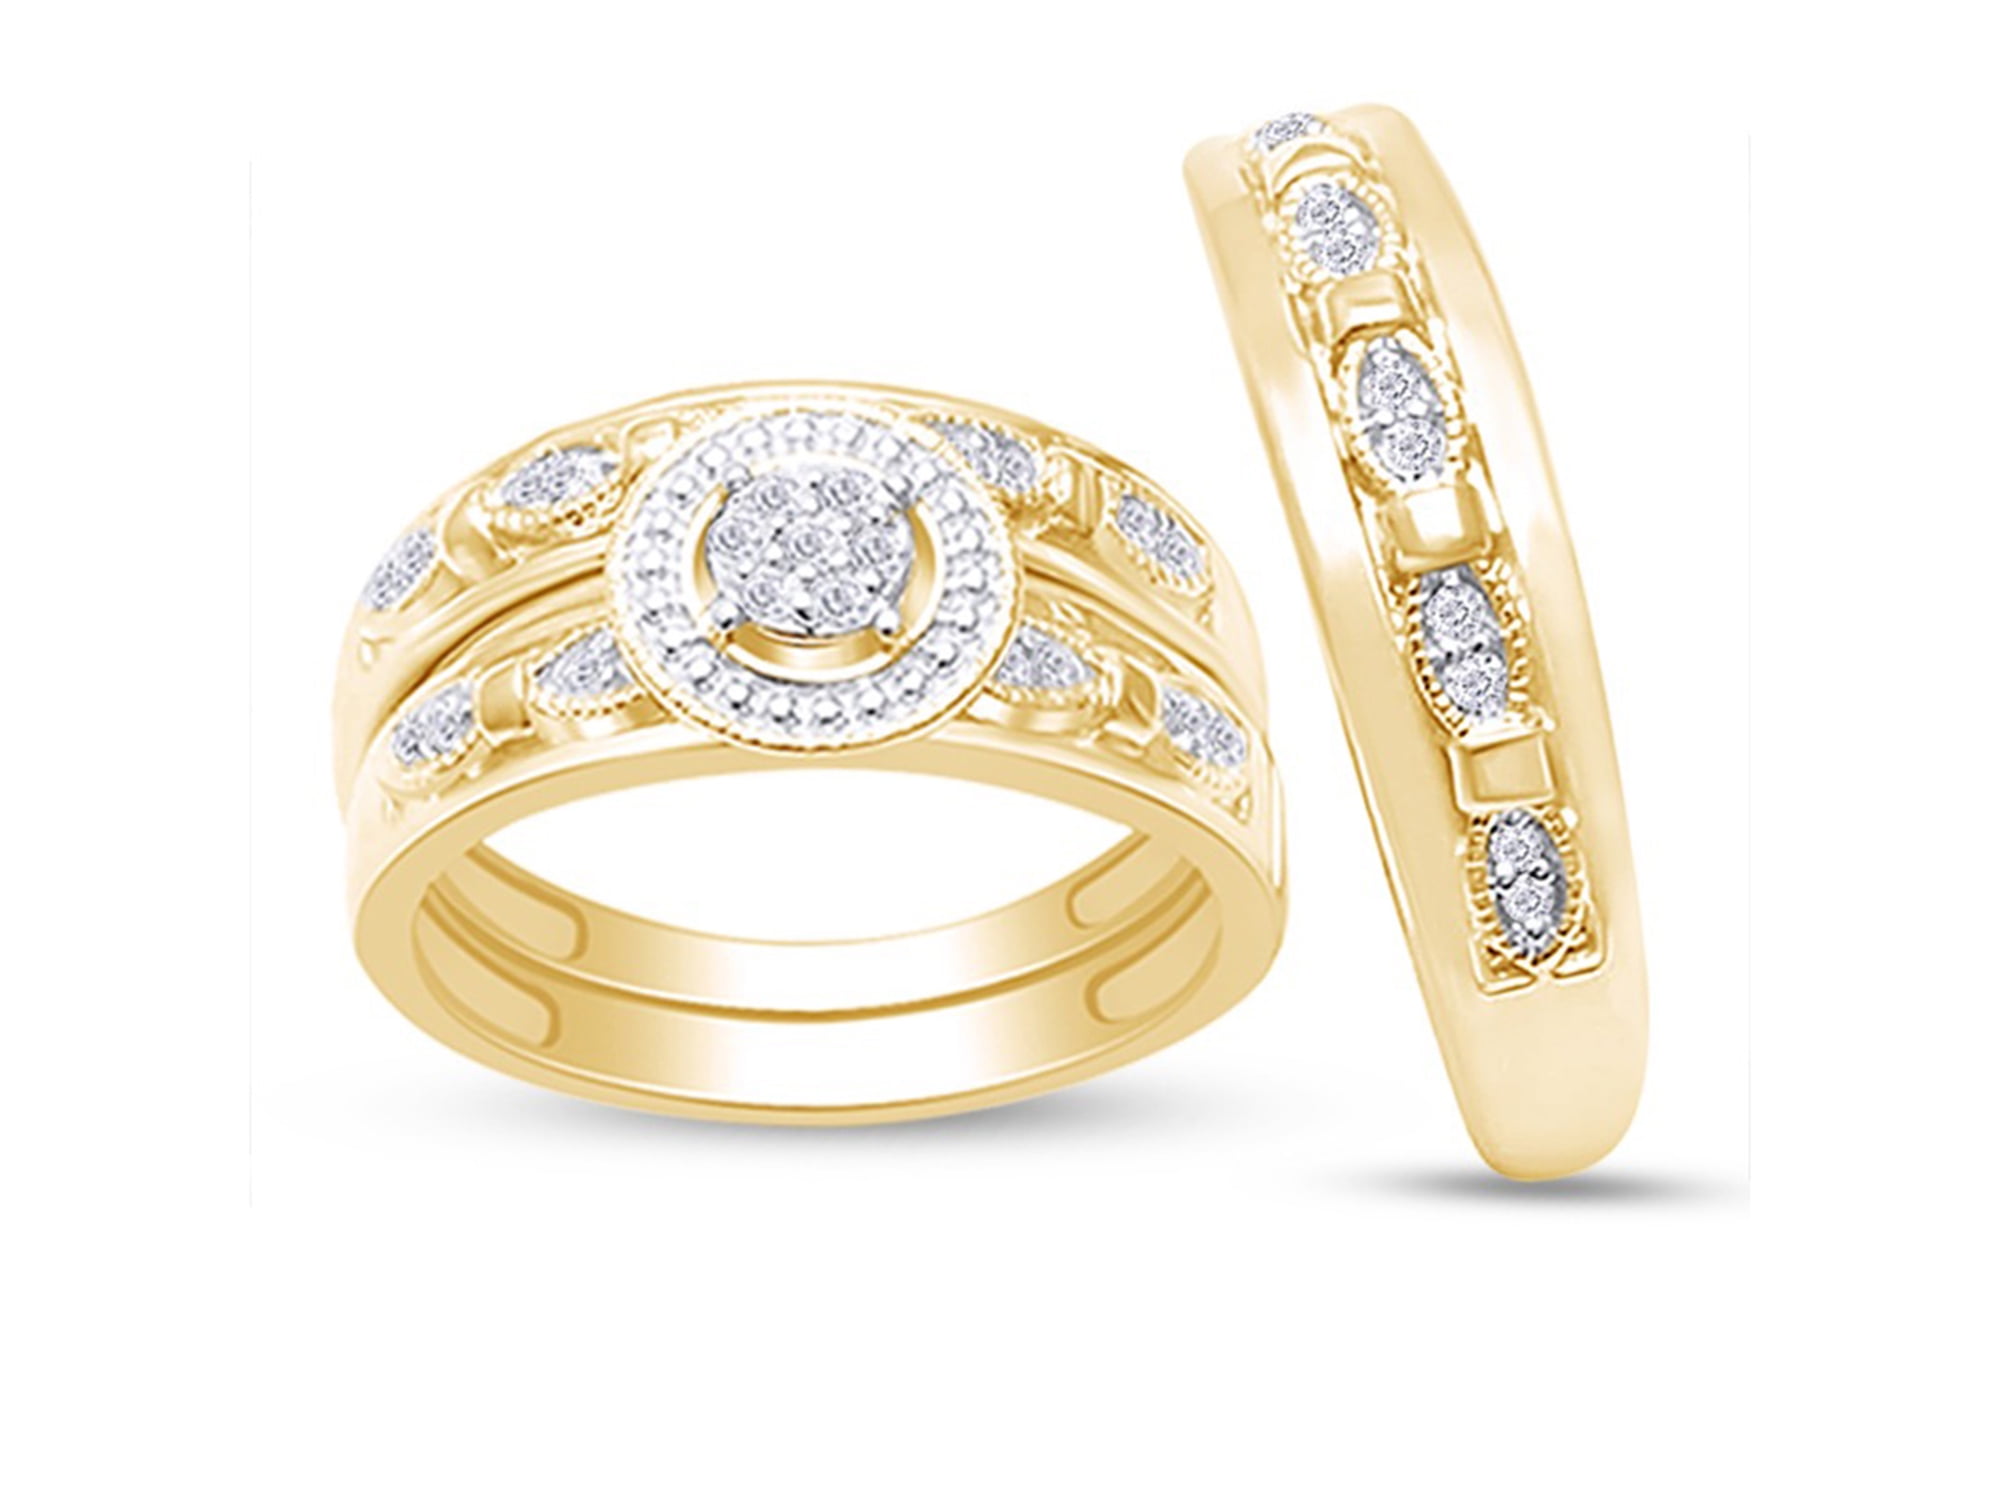 Size-5 1/6 cttw, Diamond Wedding Band in 10K Yellow Gold G-H,I2-I3